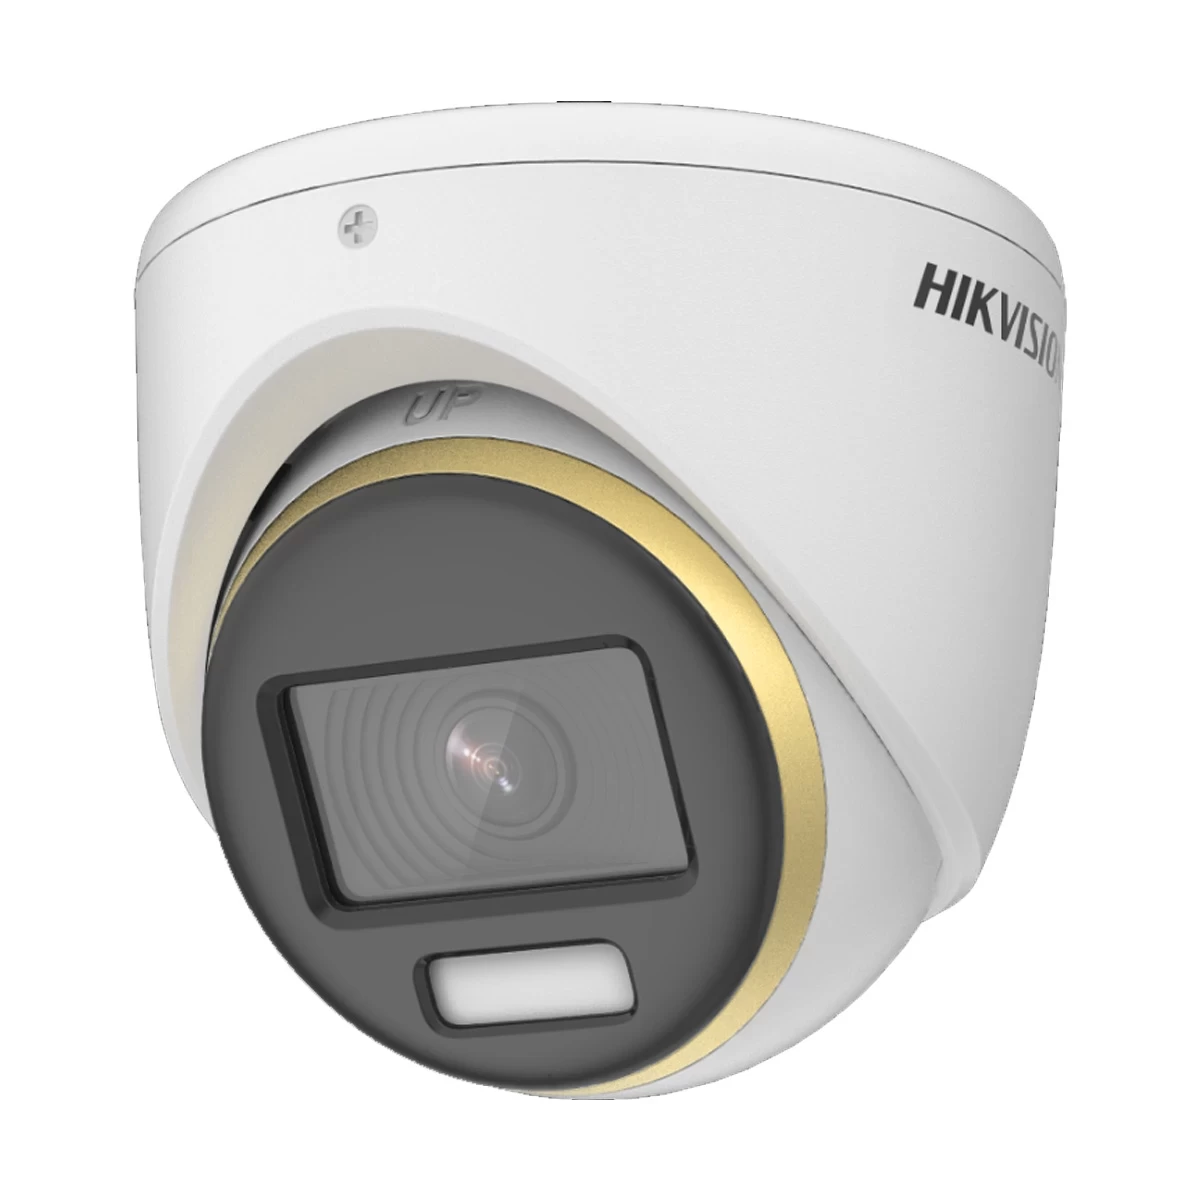 HIKVISION CCTV HD CAMERA DS-2CE70DF3T-MF DOME 2MP FULL